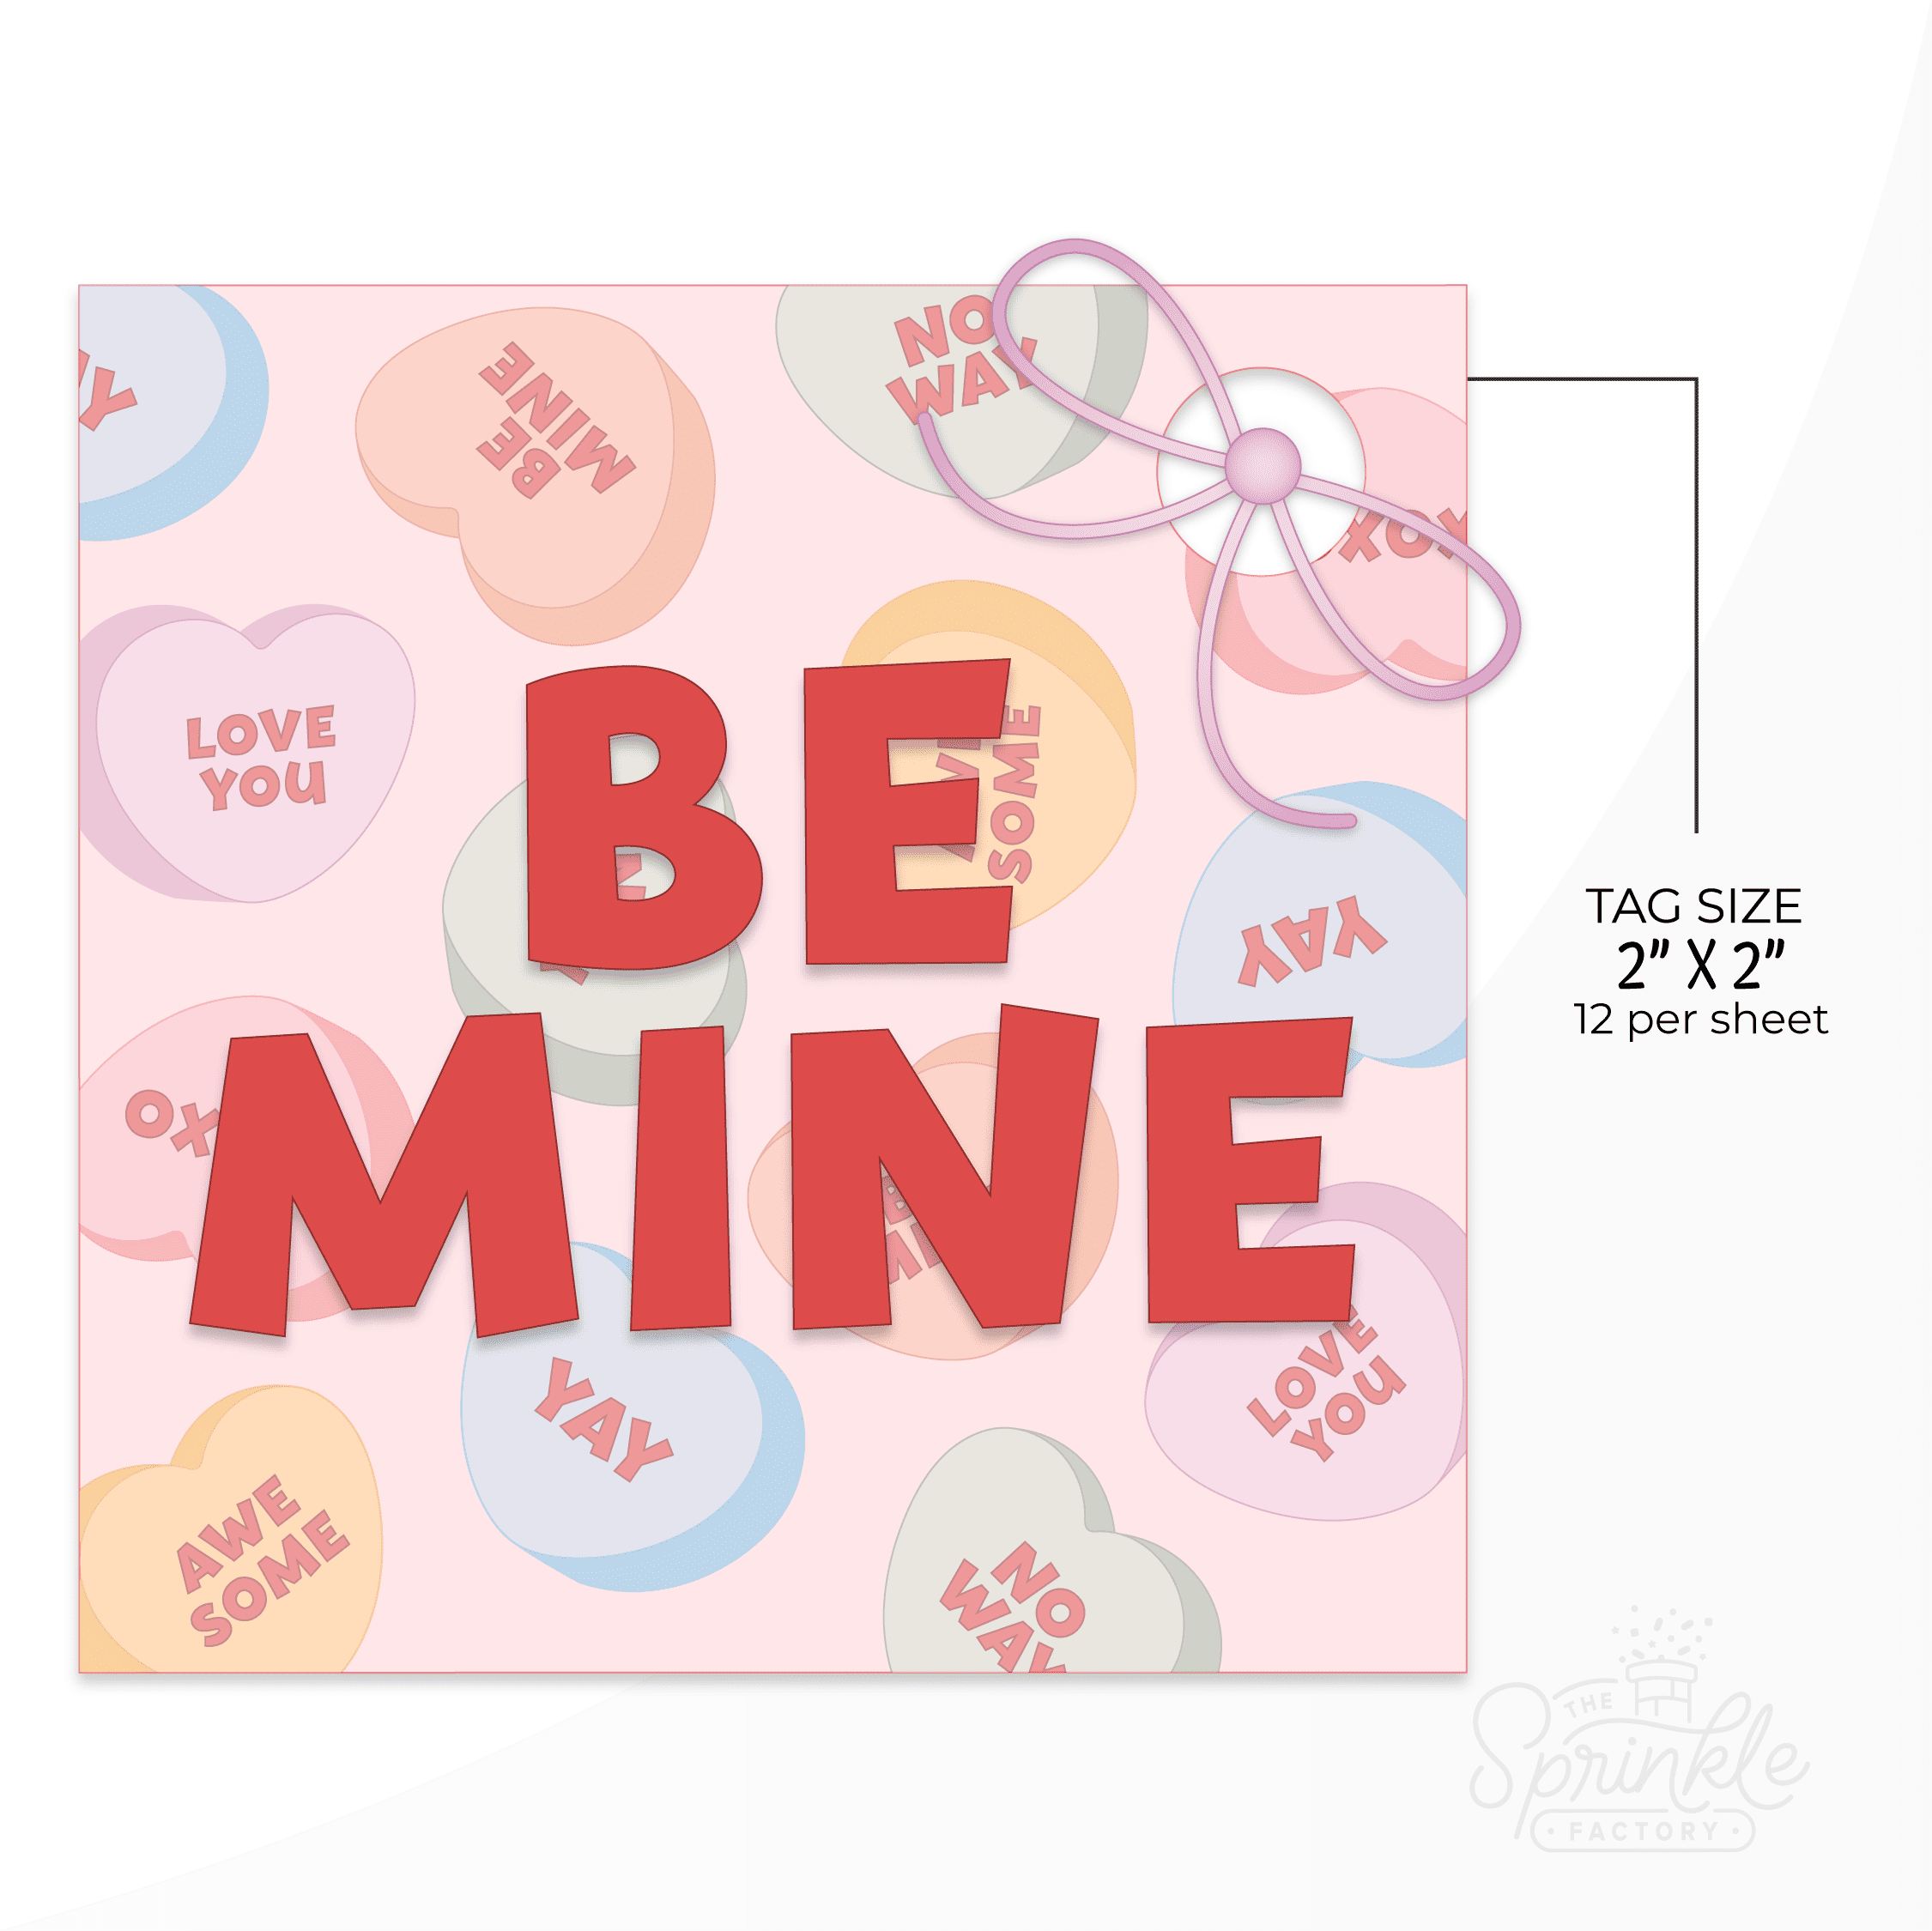 Clipart of a square tag with a hole cut out for a purple bow with a rainbow conversation heart print all over it with pink background and BE MINE written in the middle in bold red letters with size guide.